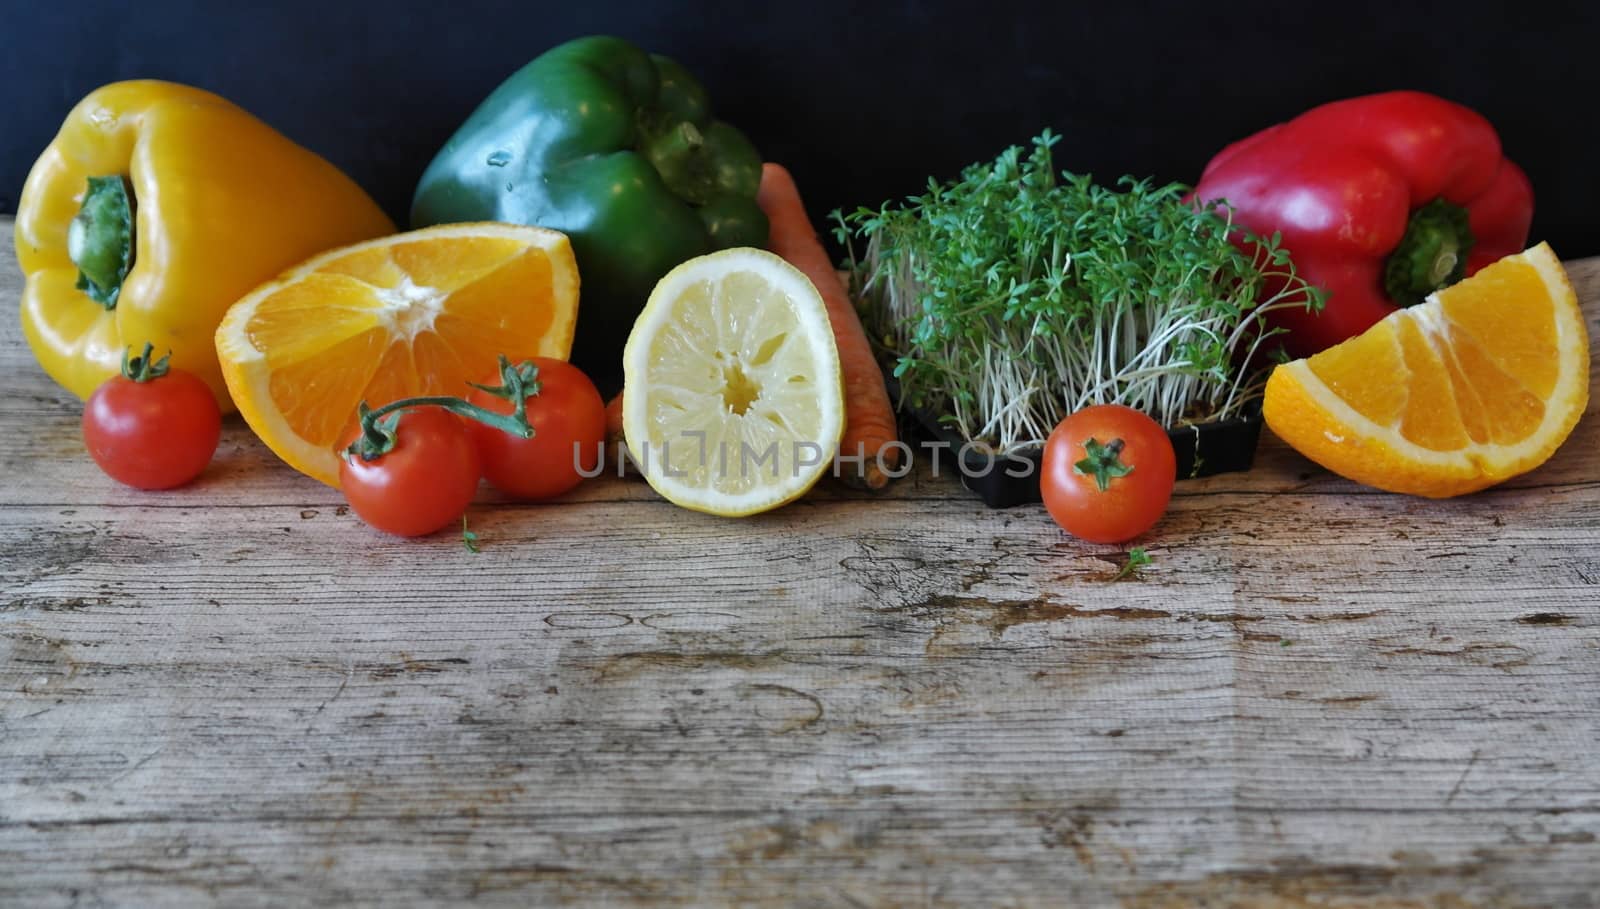 In images Fresh and colorful vegetables and fruits in a wooden crate